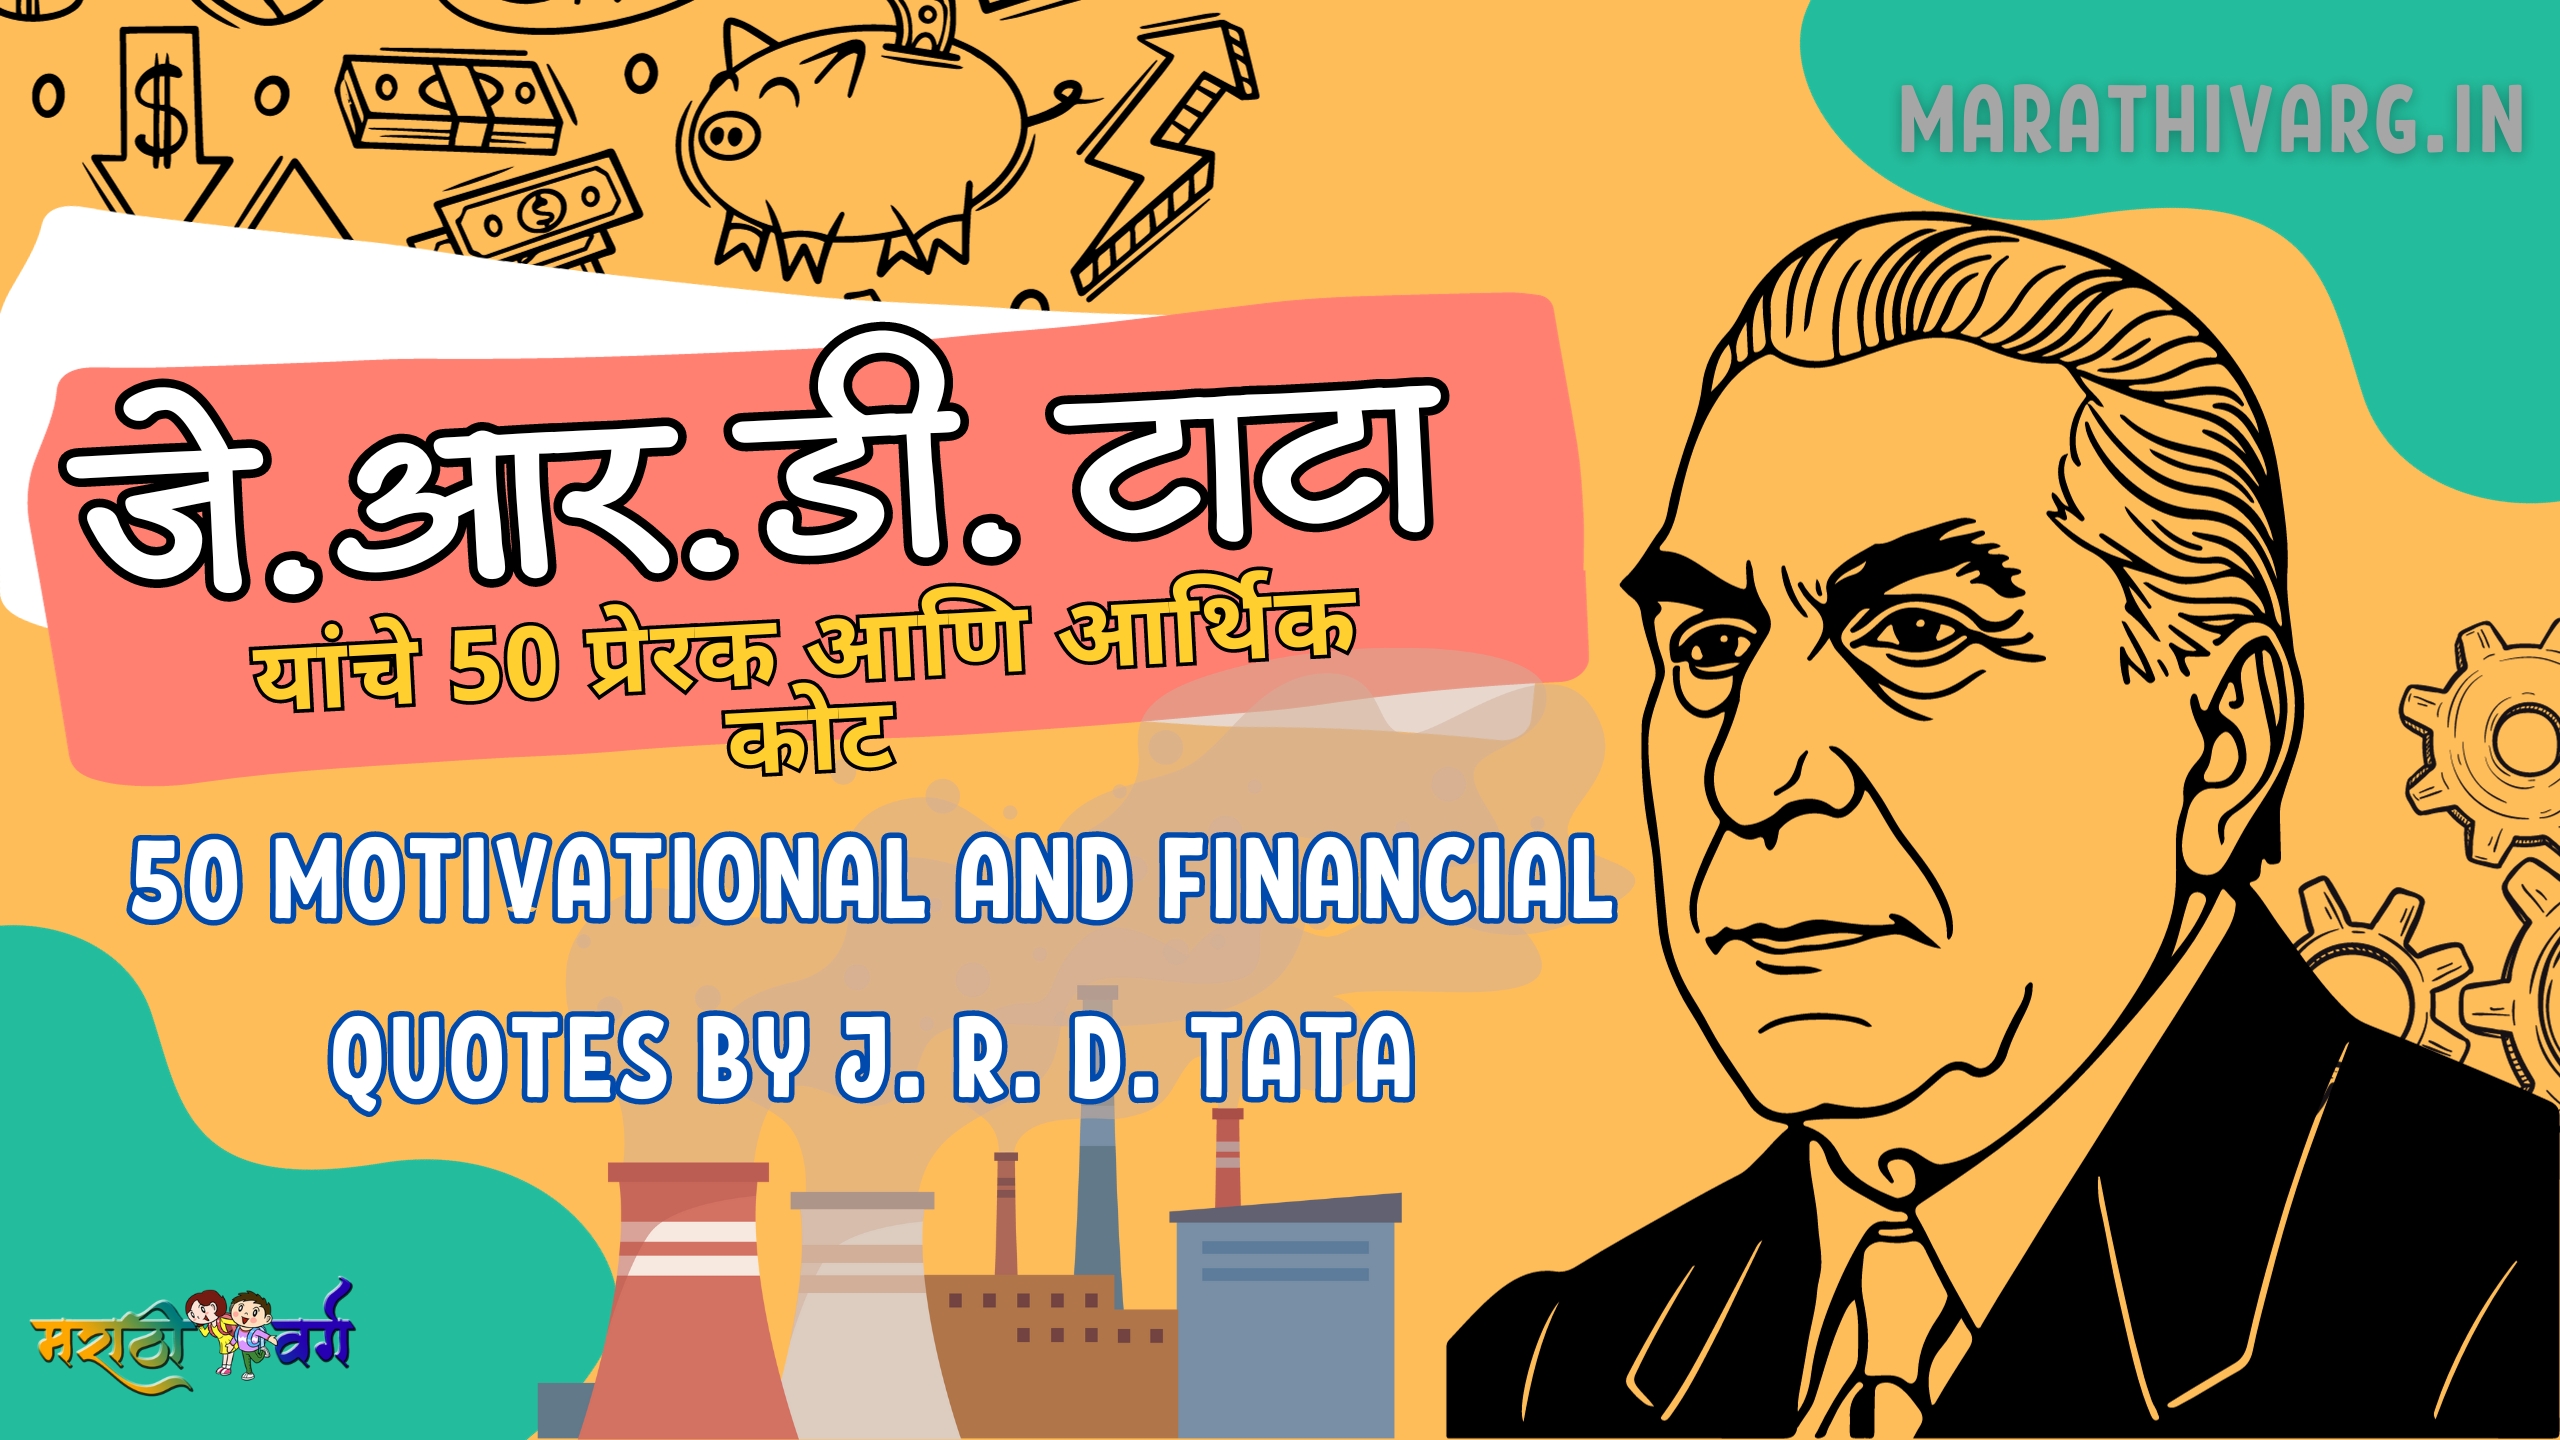 50 motivational and financial quotes by J. R. D. Tata